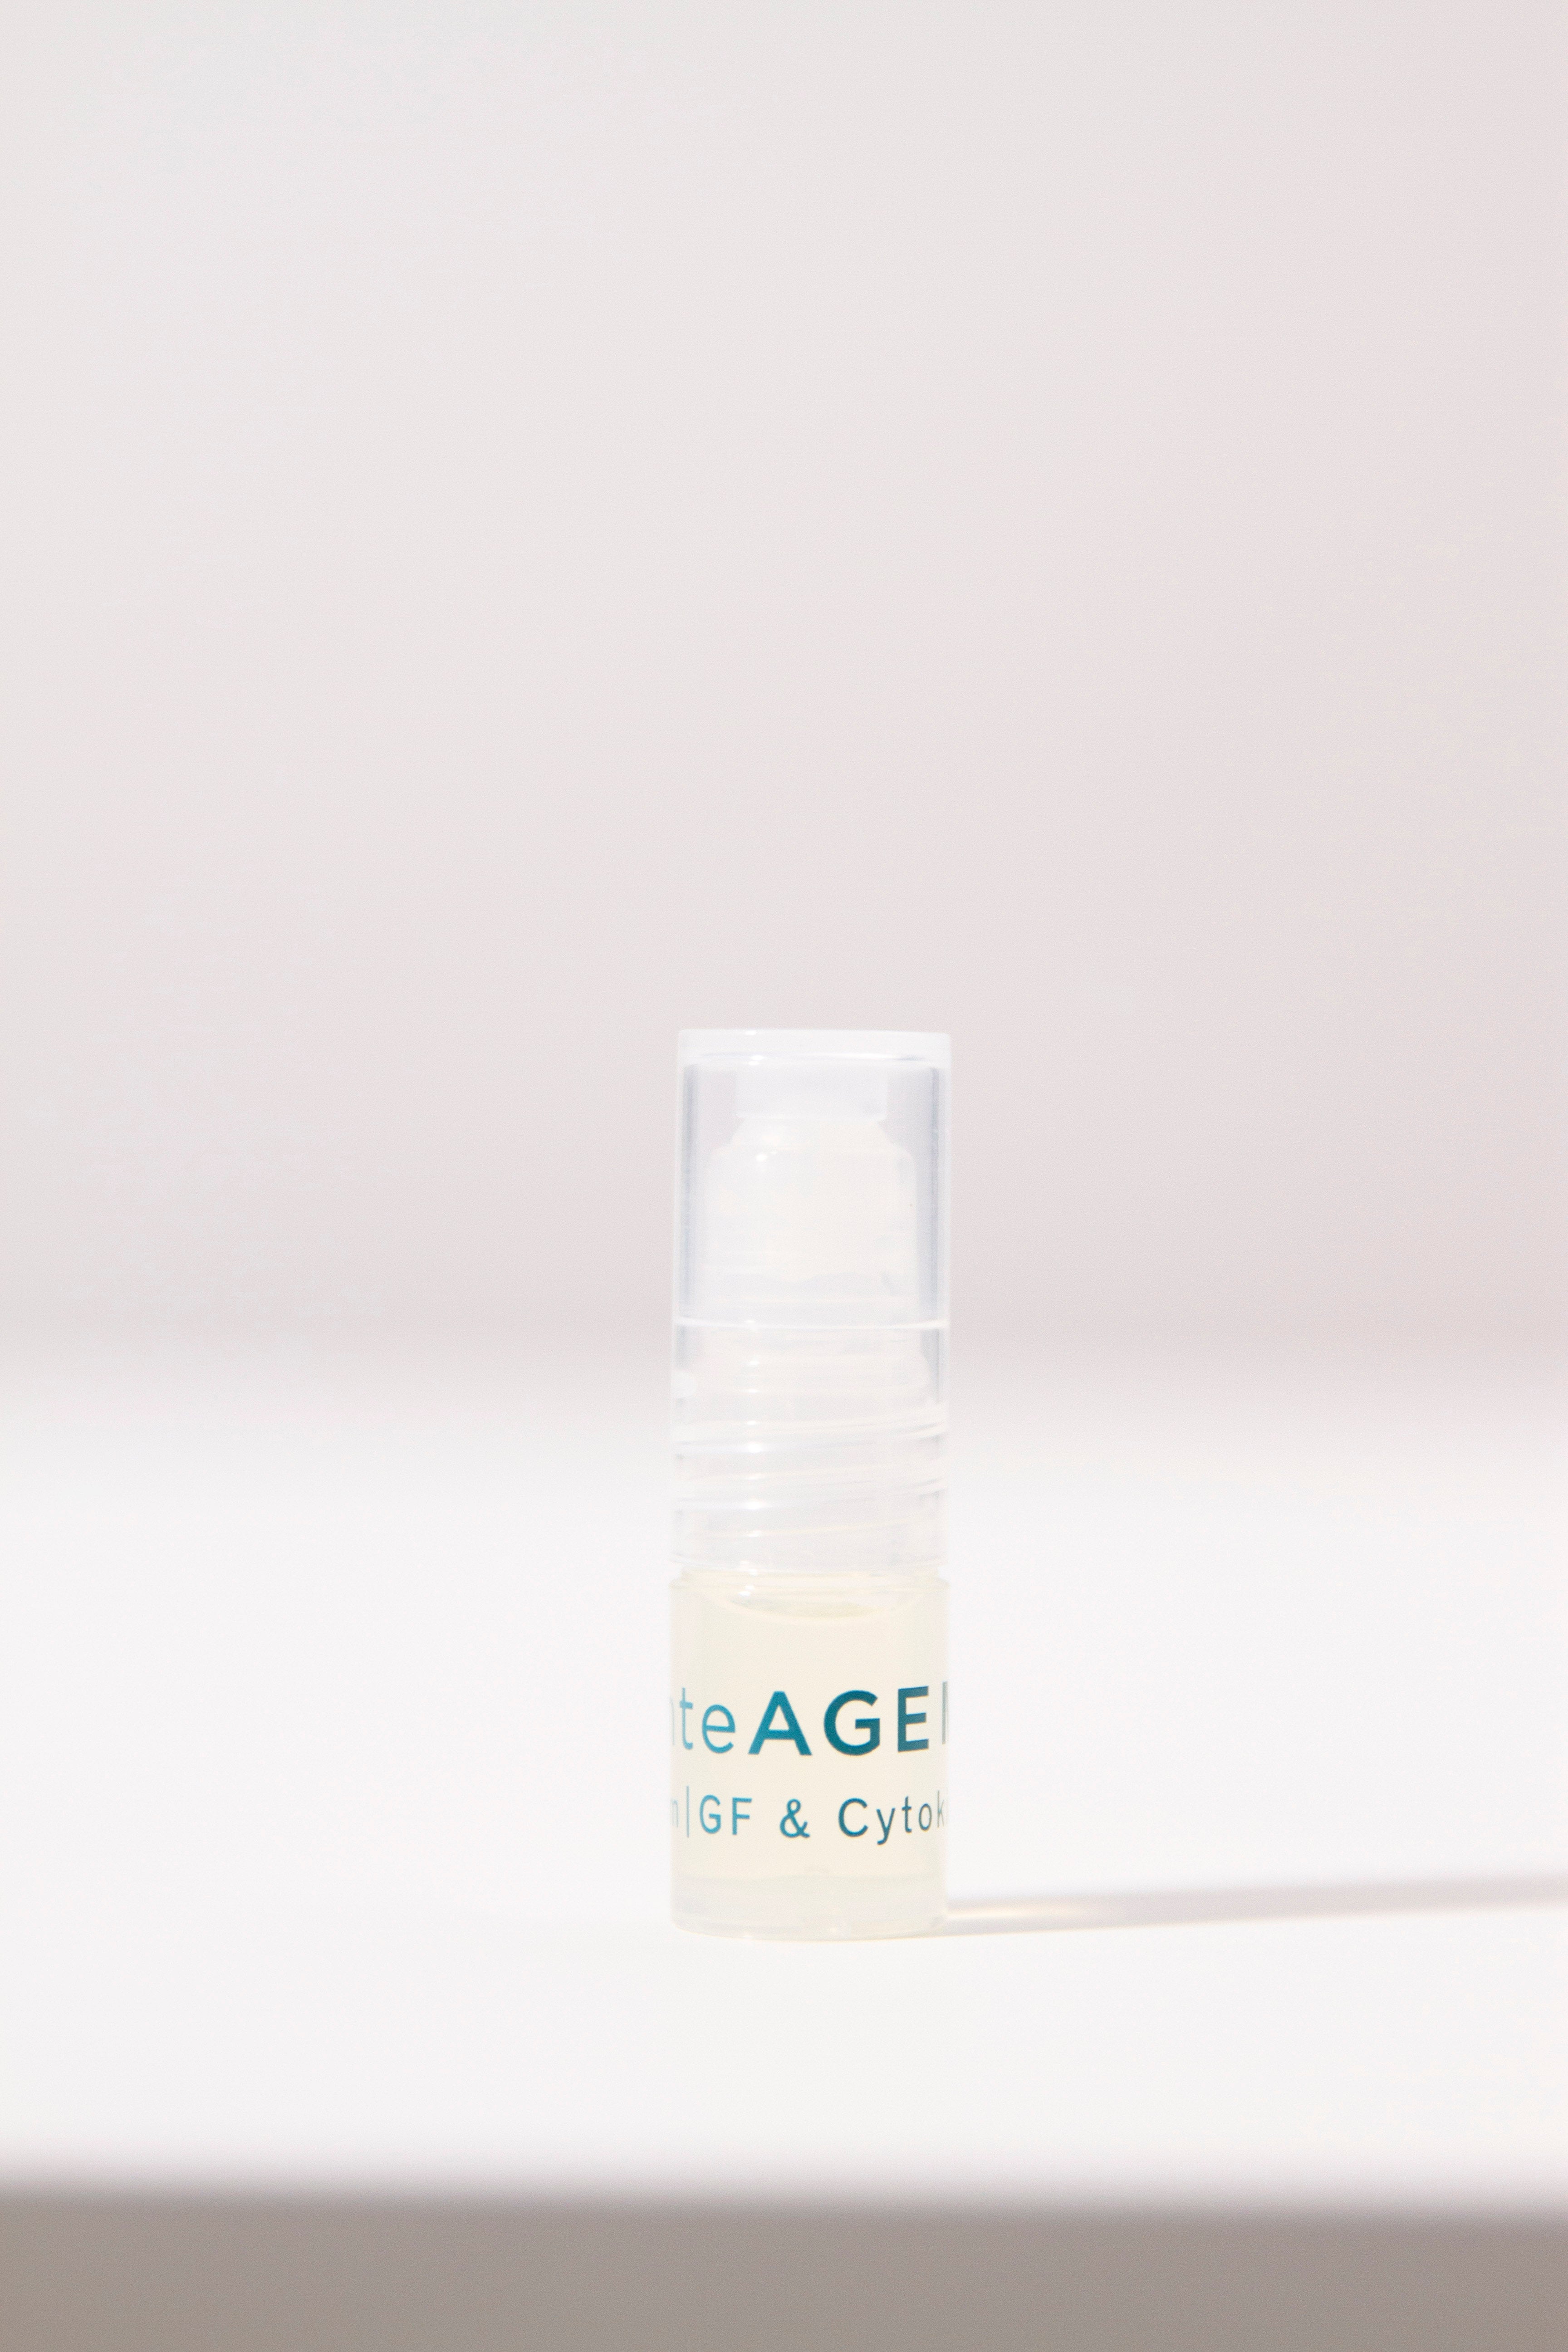 AnteAGE Home Microneedling Solution - Click to Buy!